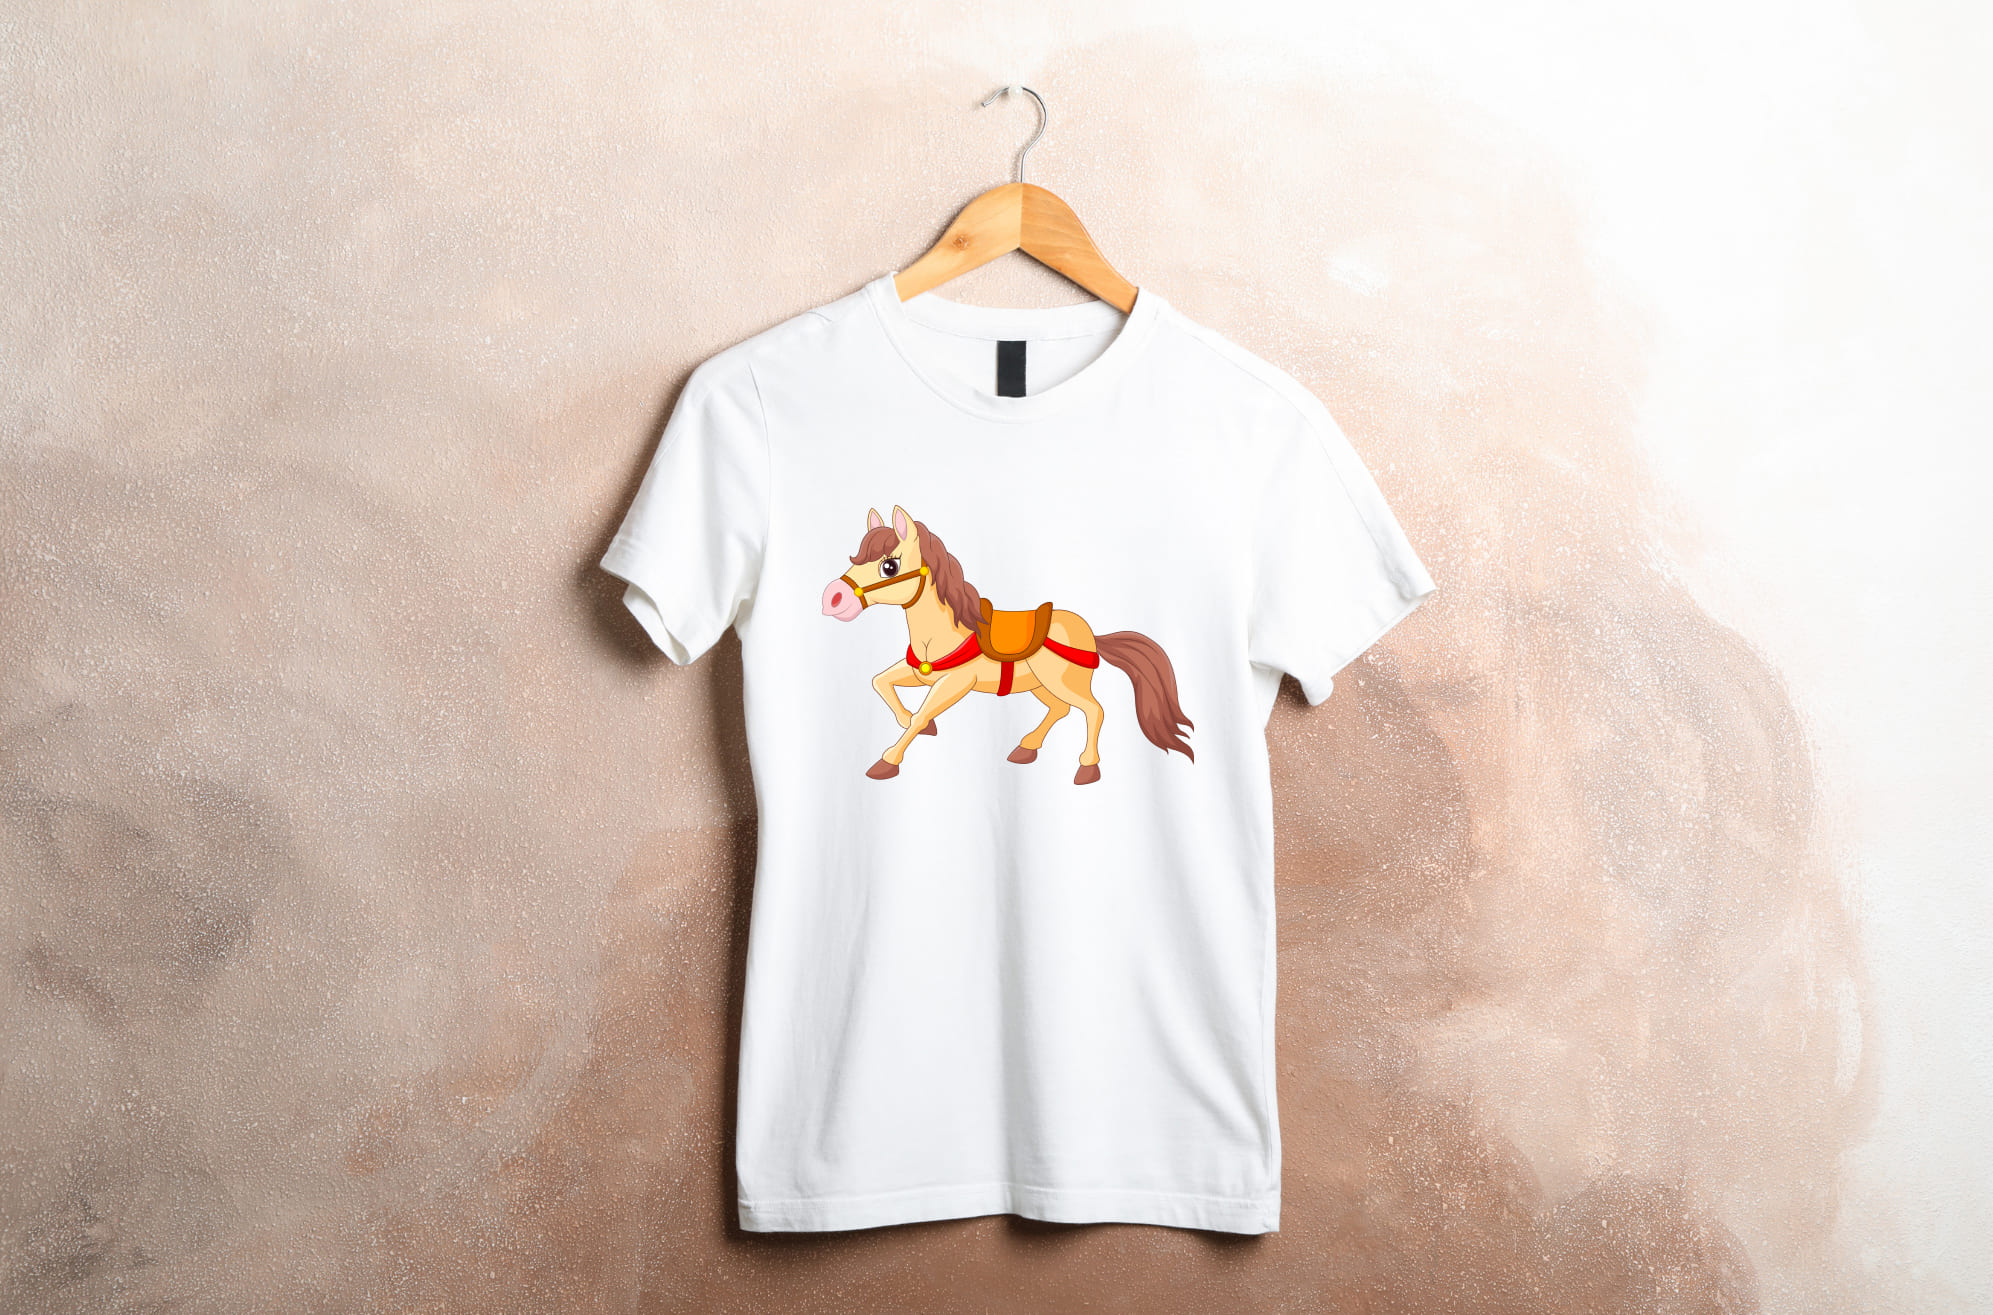 White t-shirt with a cute horse on a wooden hanger on a beige background.